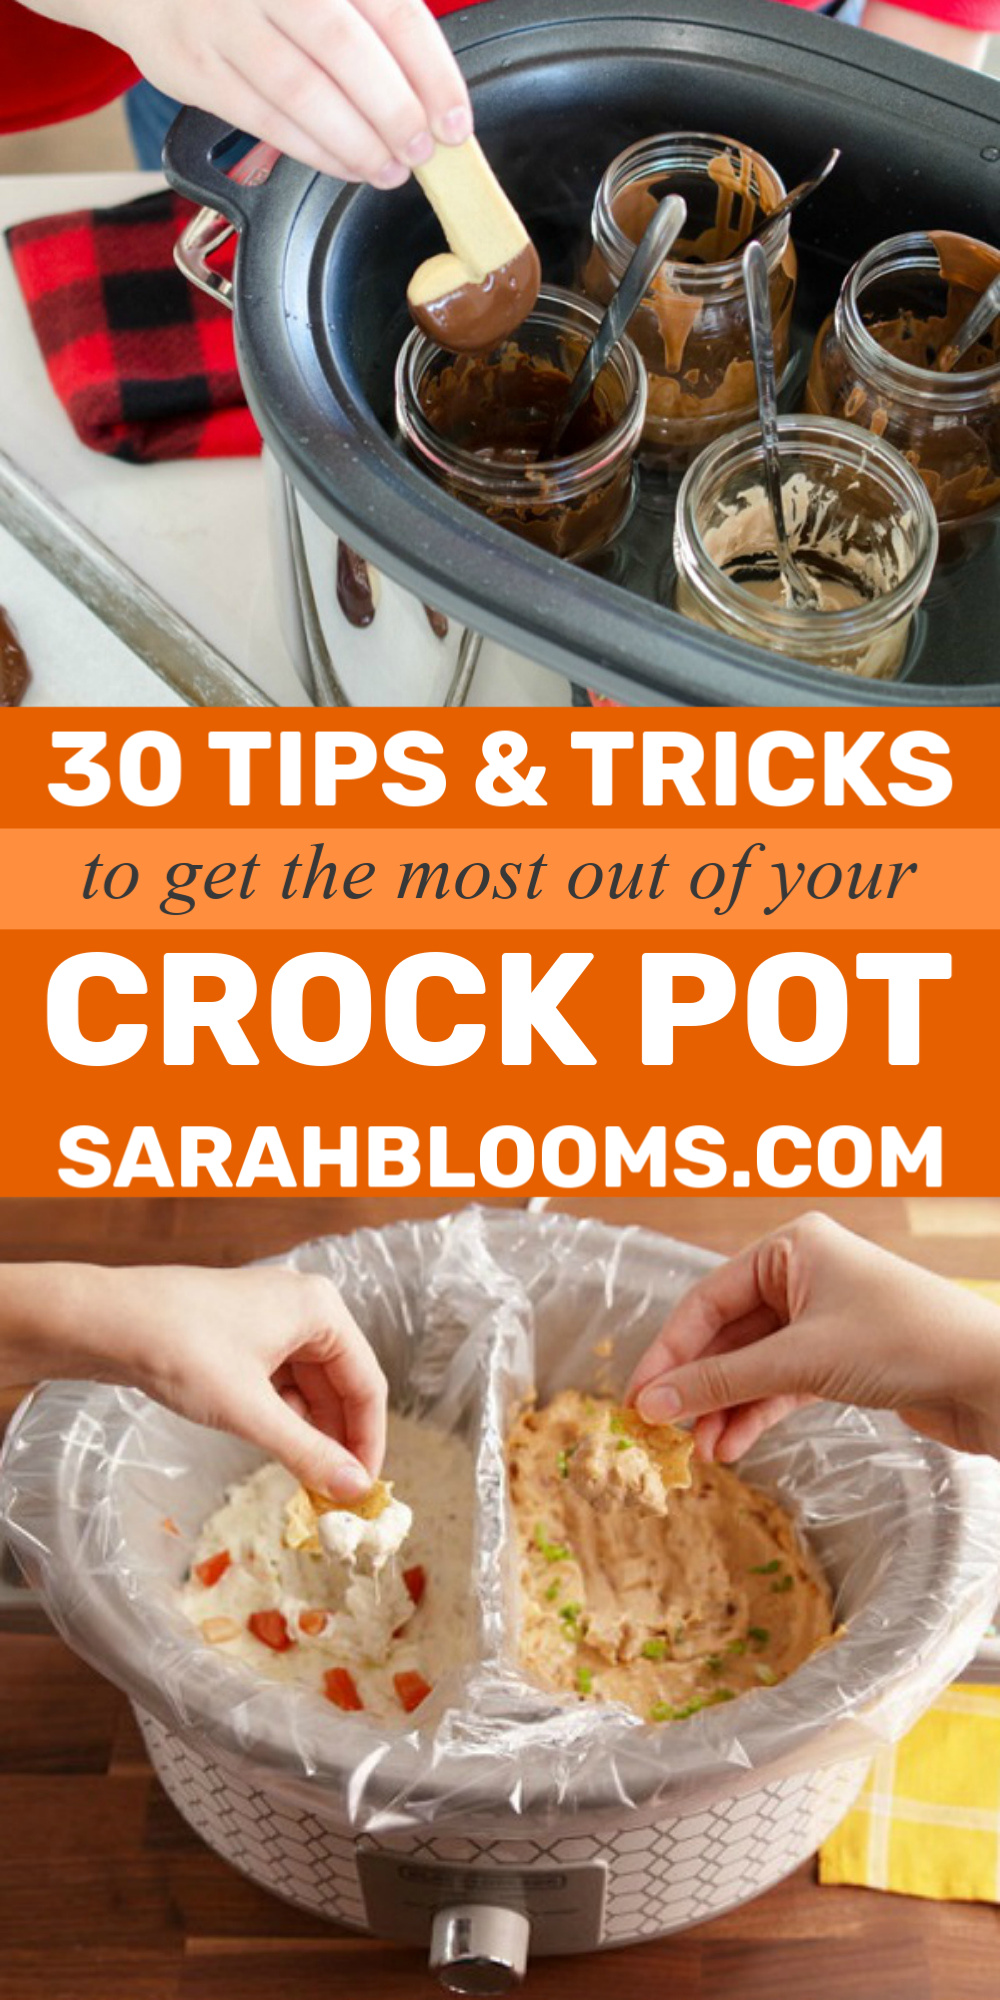 30 Slow Cooker Hacks You Probably Didn't Know About #slowcooker #slowcookertips #slowcookerhacks #crockpot #crockpothacks #crockpottips #kitchenhacks #kitchentips #cookinghacks #cookingtips #SarahBlooms